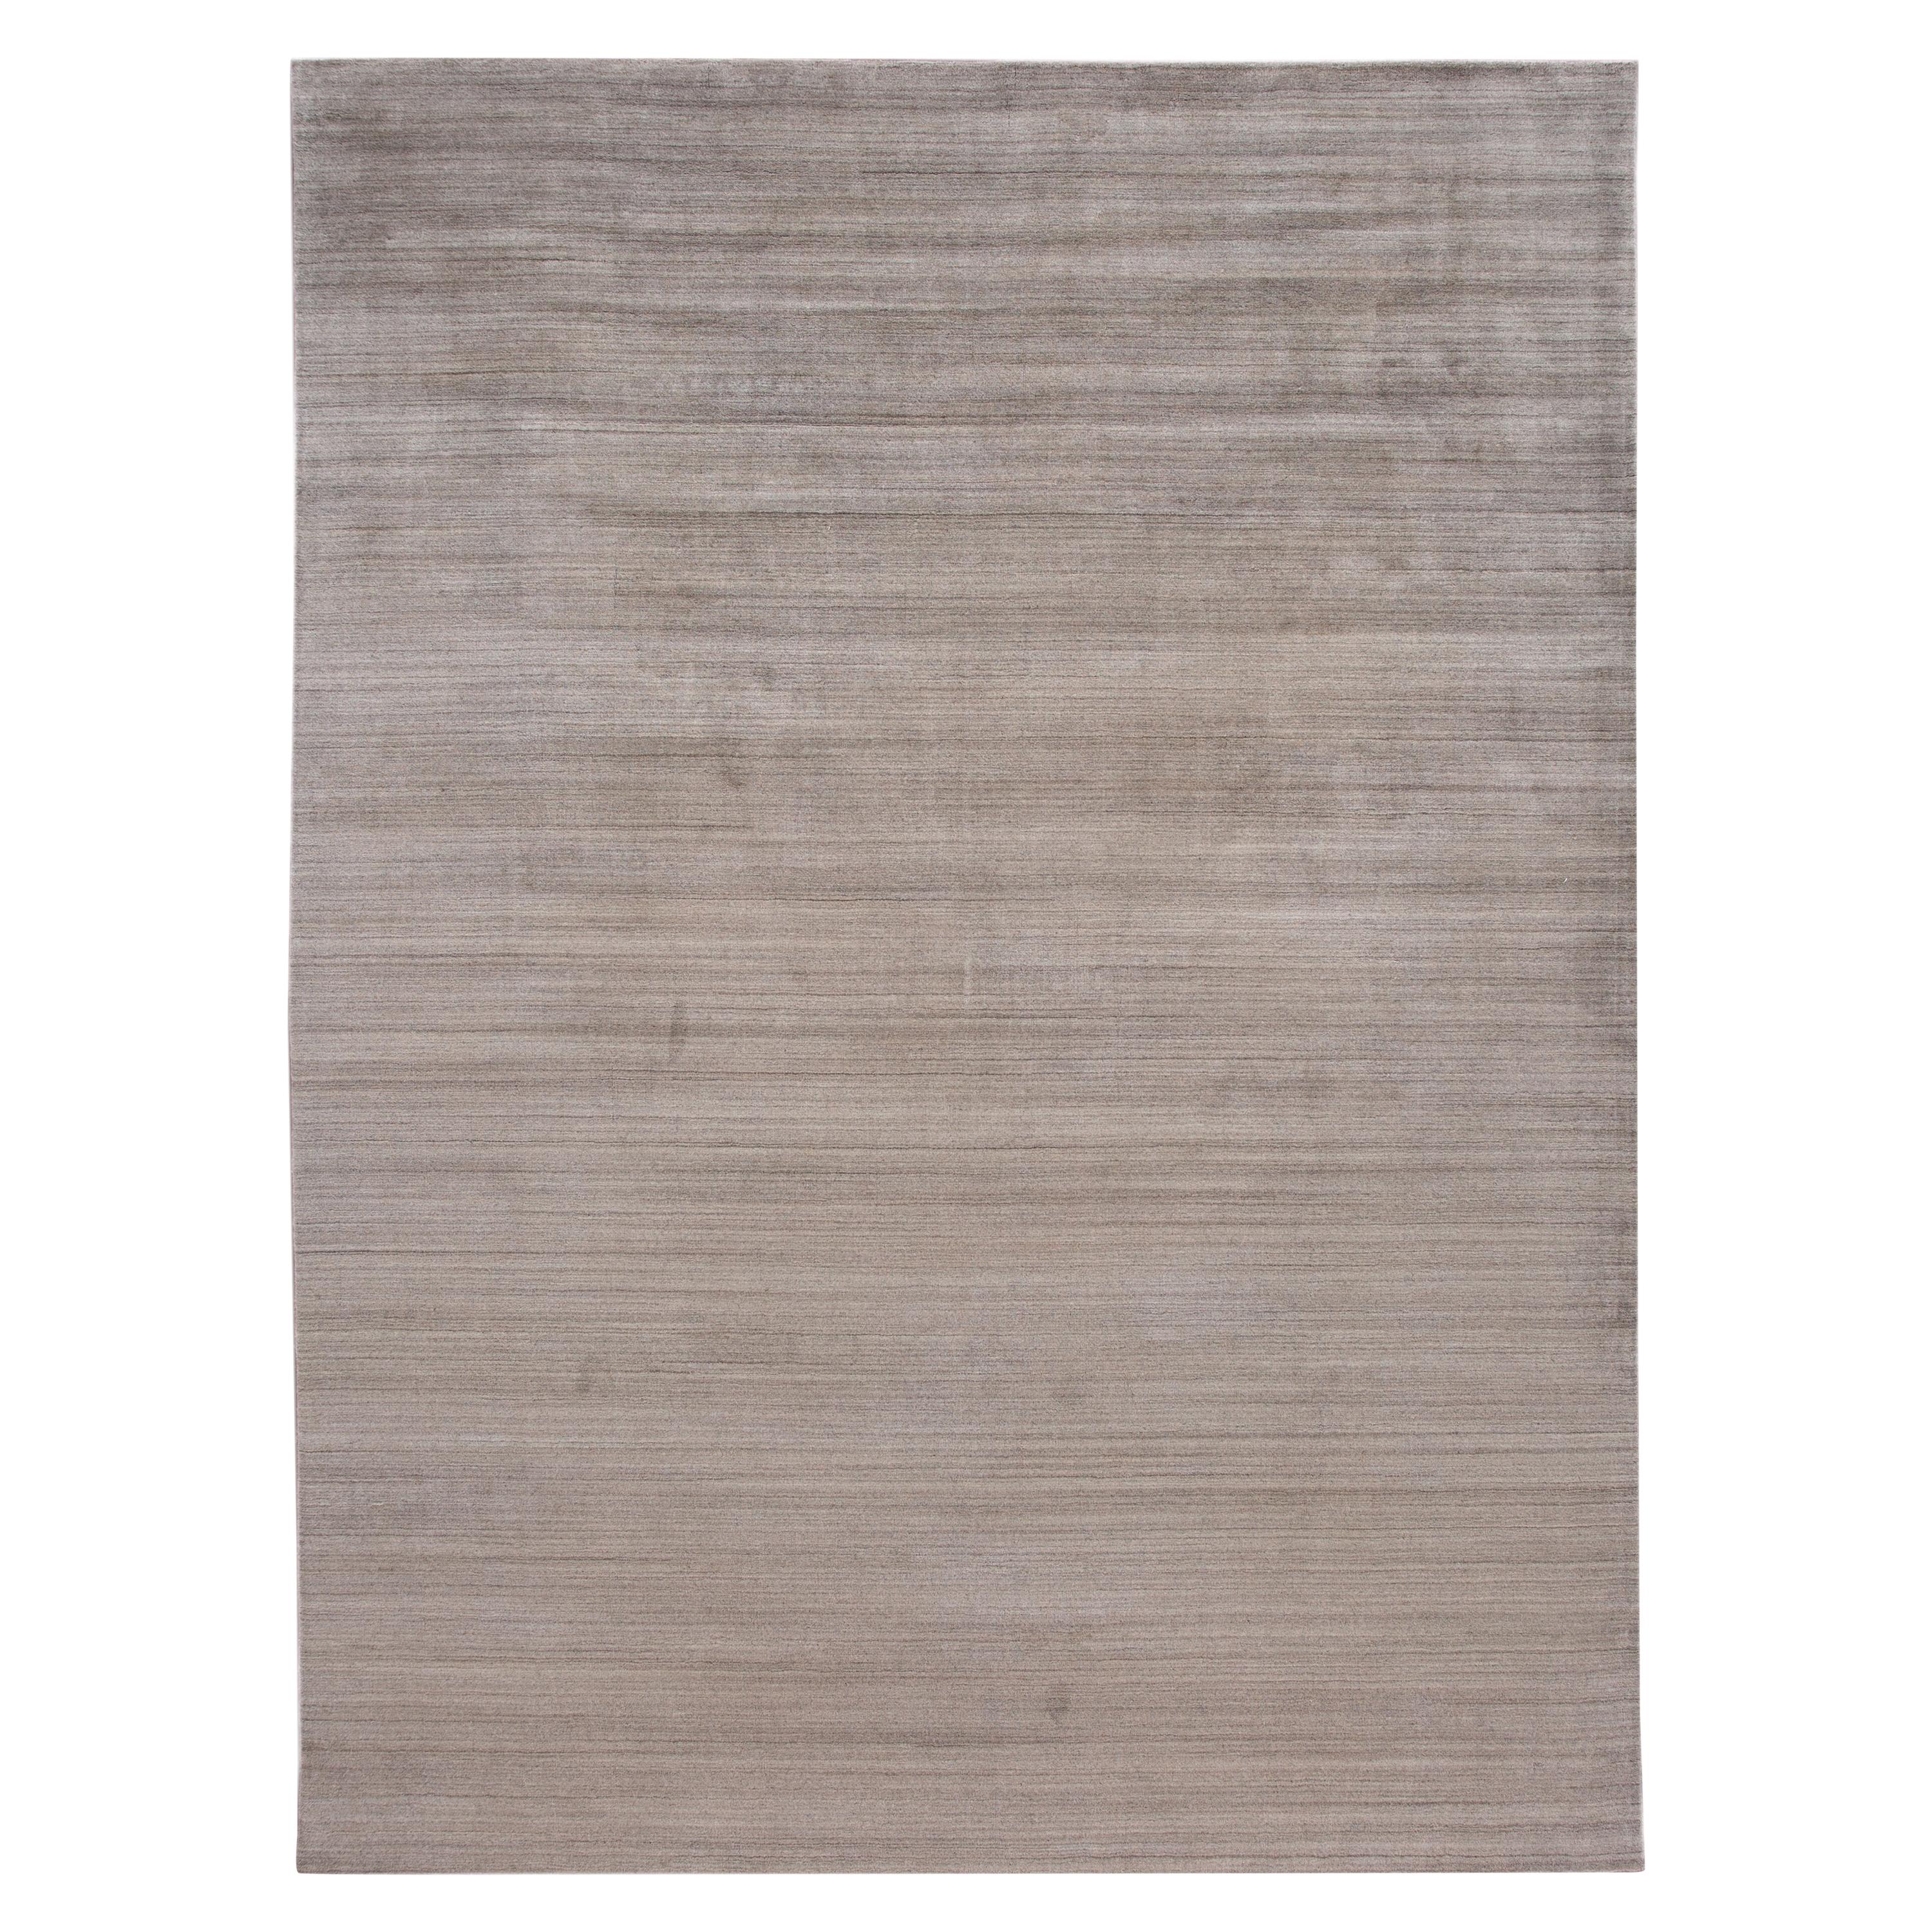 21st Century Contemporary Indian Gabbeh Wool Rug